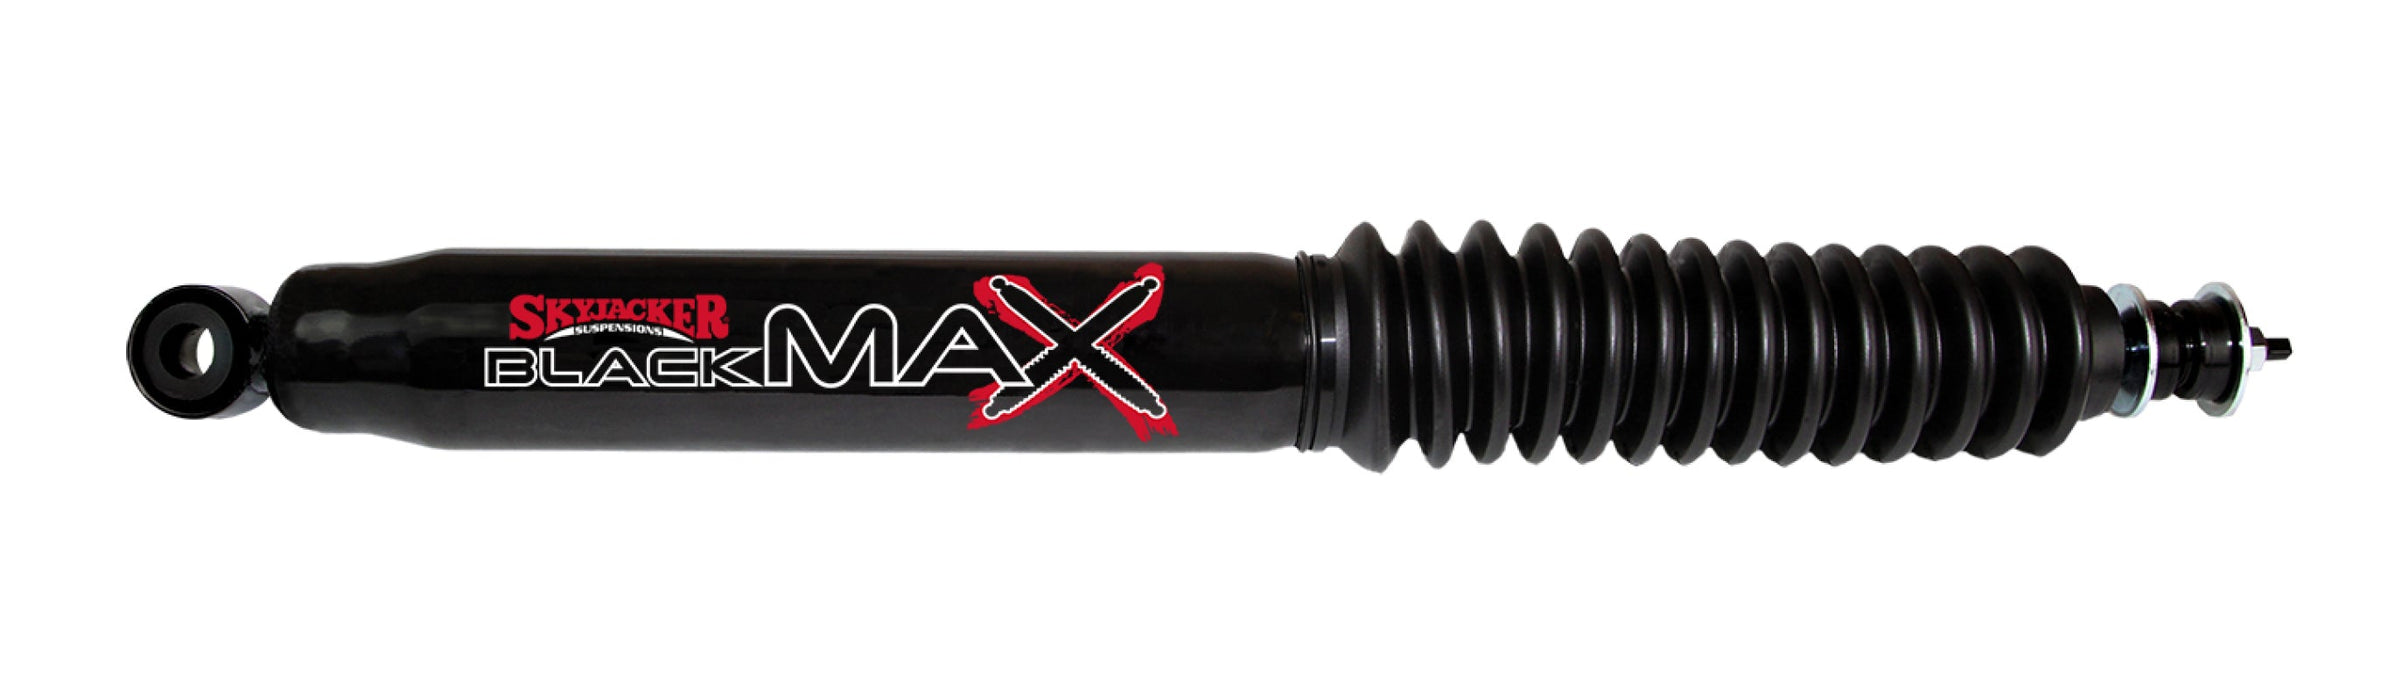 Black max shock absorber with red logo on a skyjacker product for toyota fj cruiser